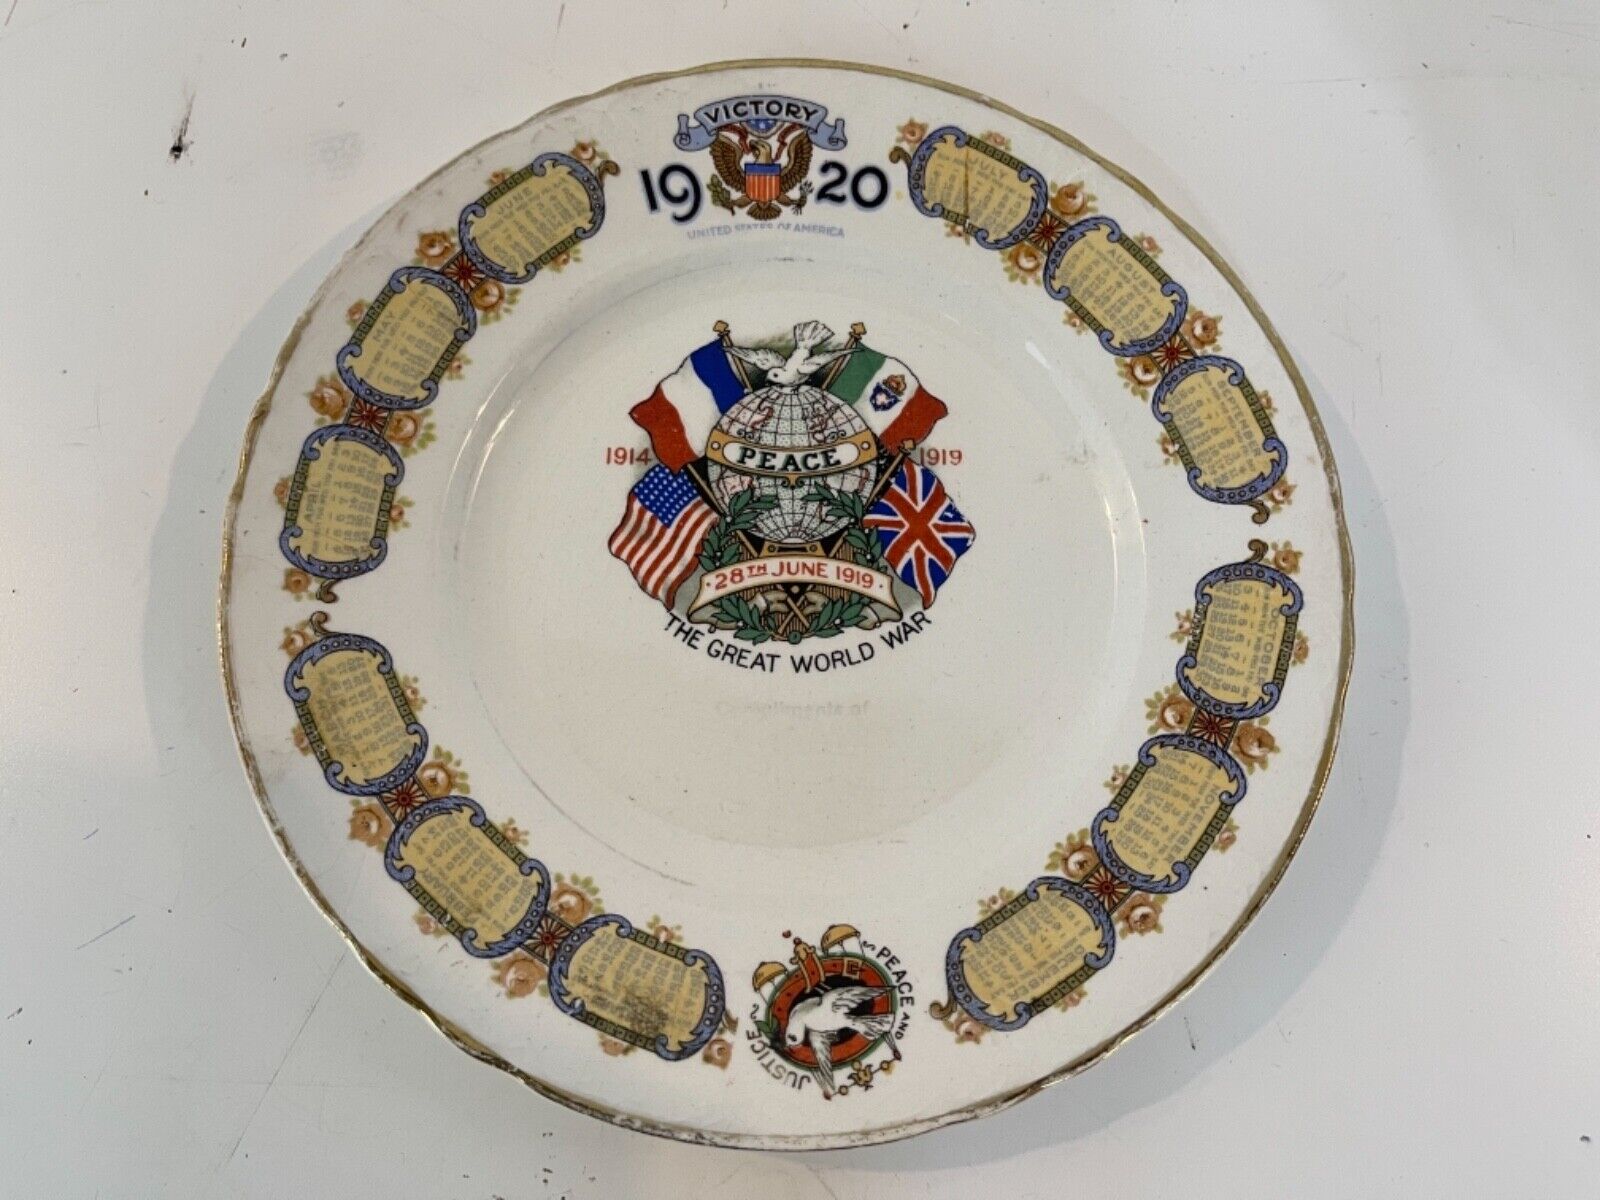 Antique “The Great World War” Peace and Justice Porcelain Calendar Plate